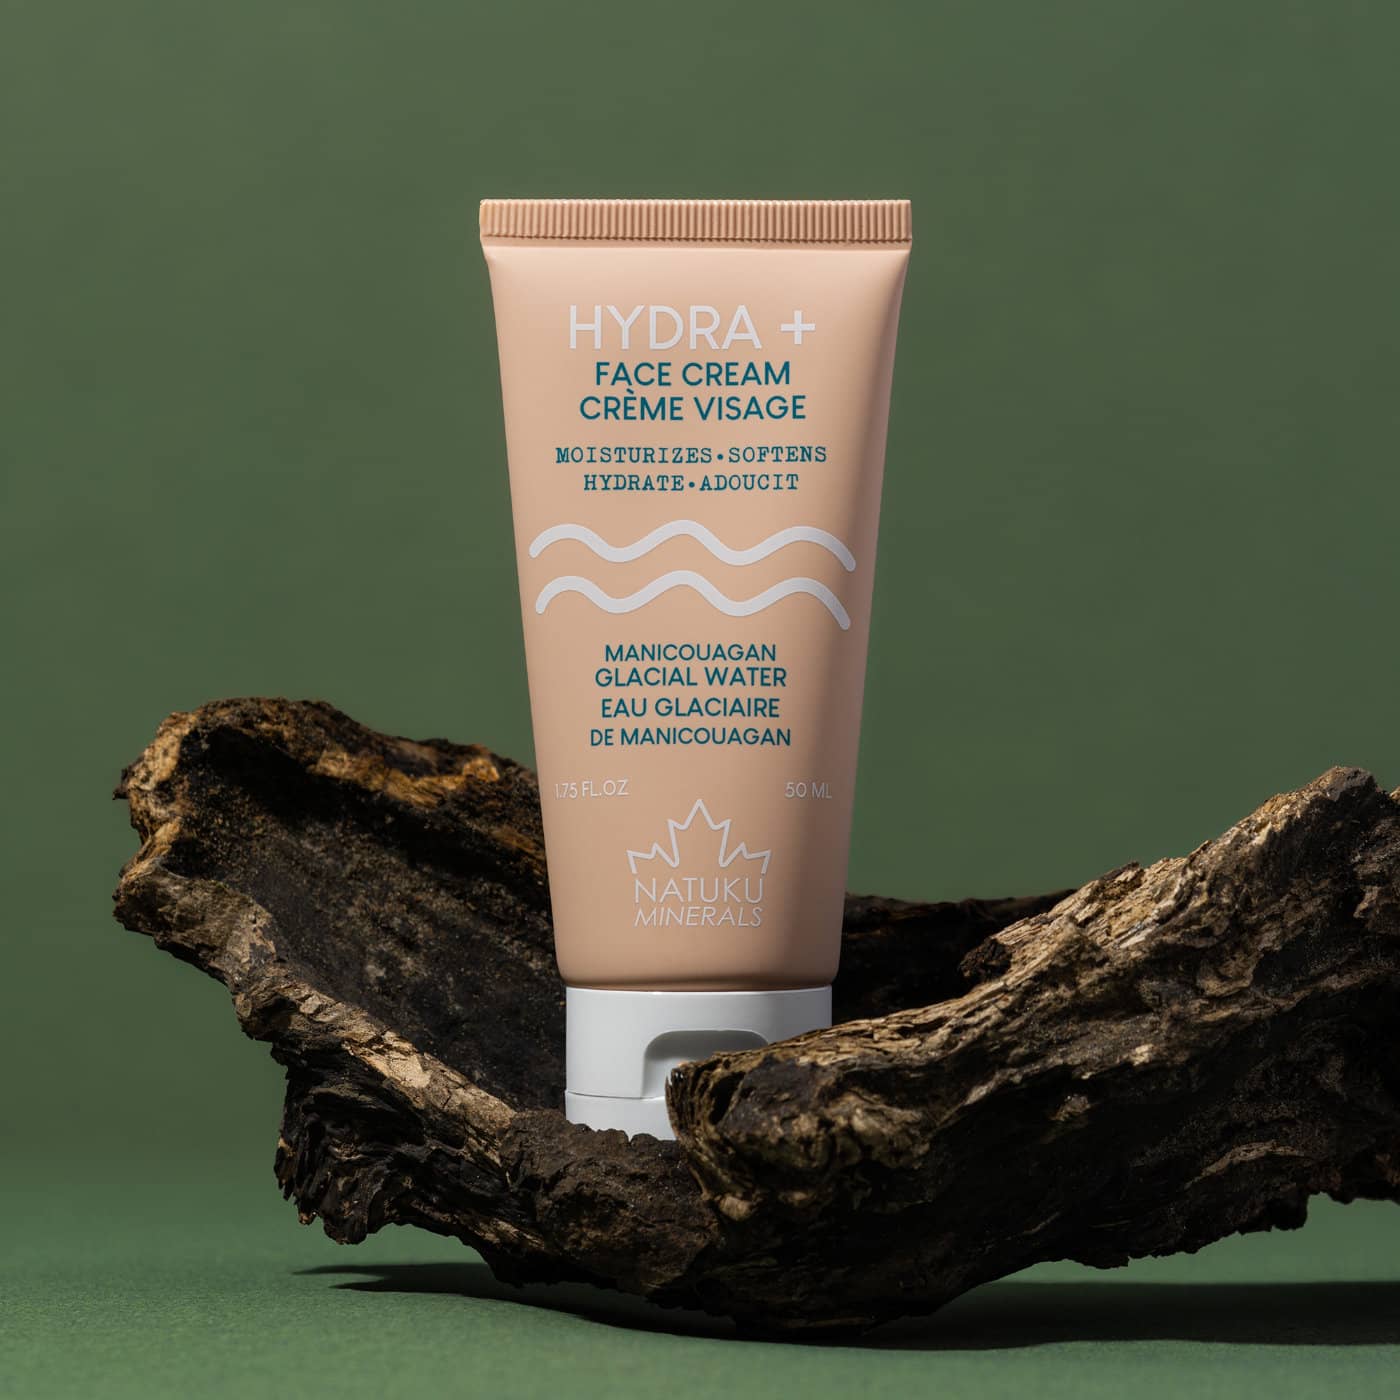 Hydra+ - Face cream and clay mask from Manicouagan